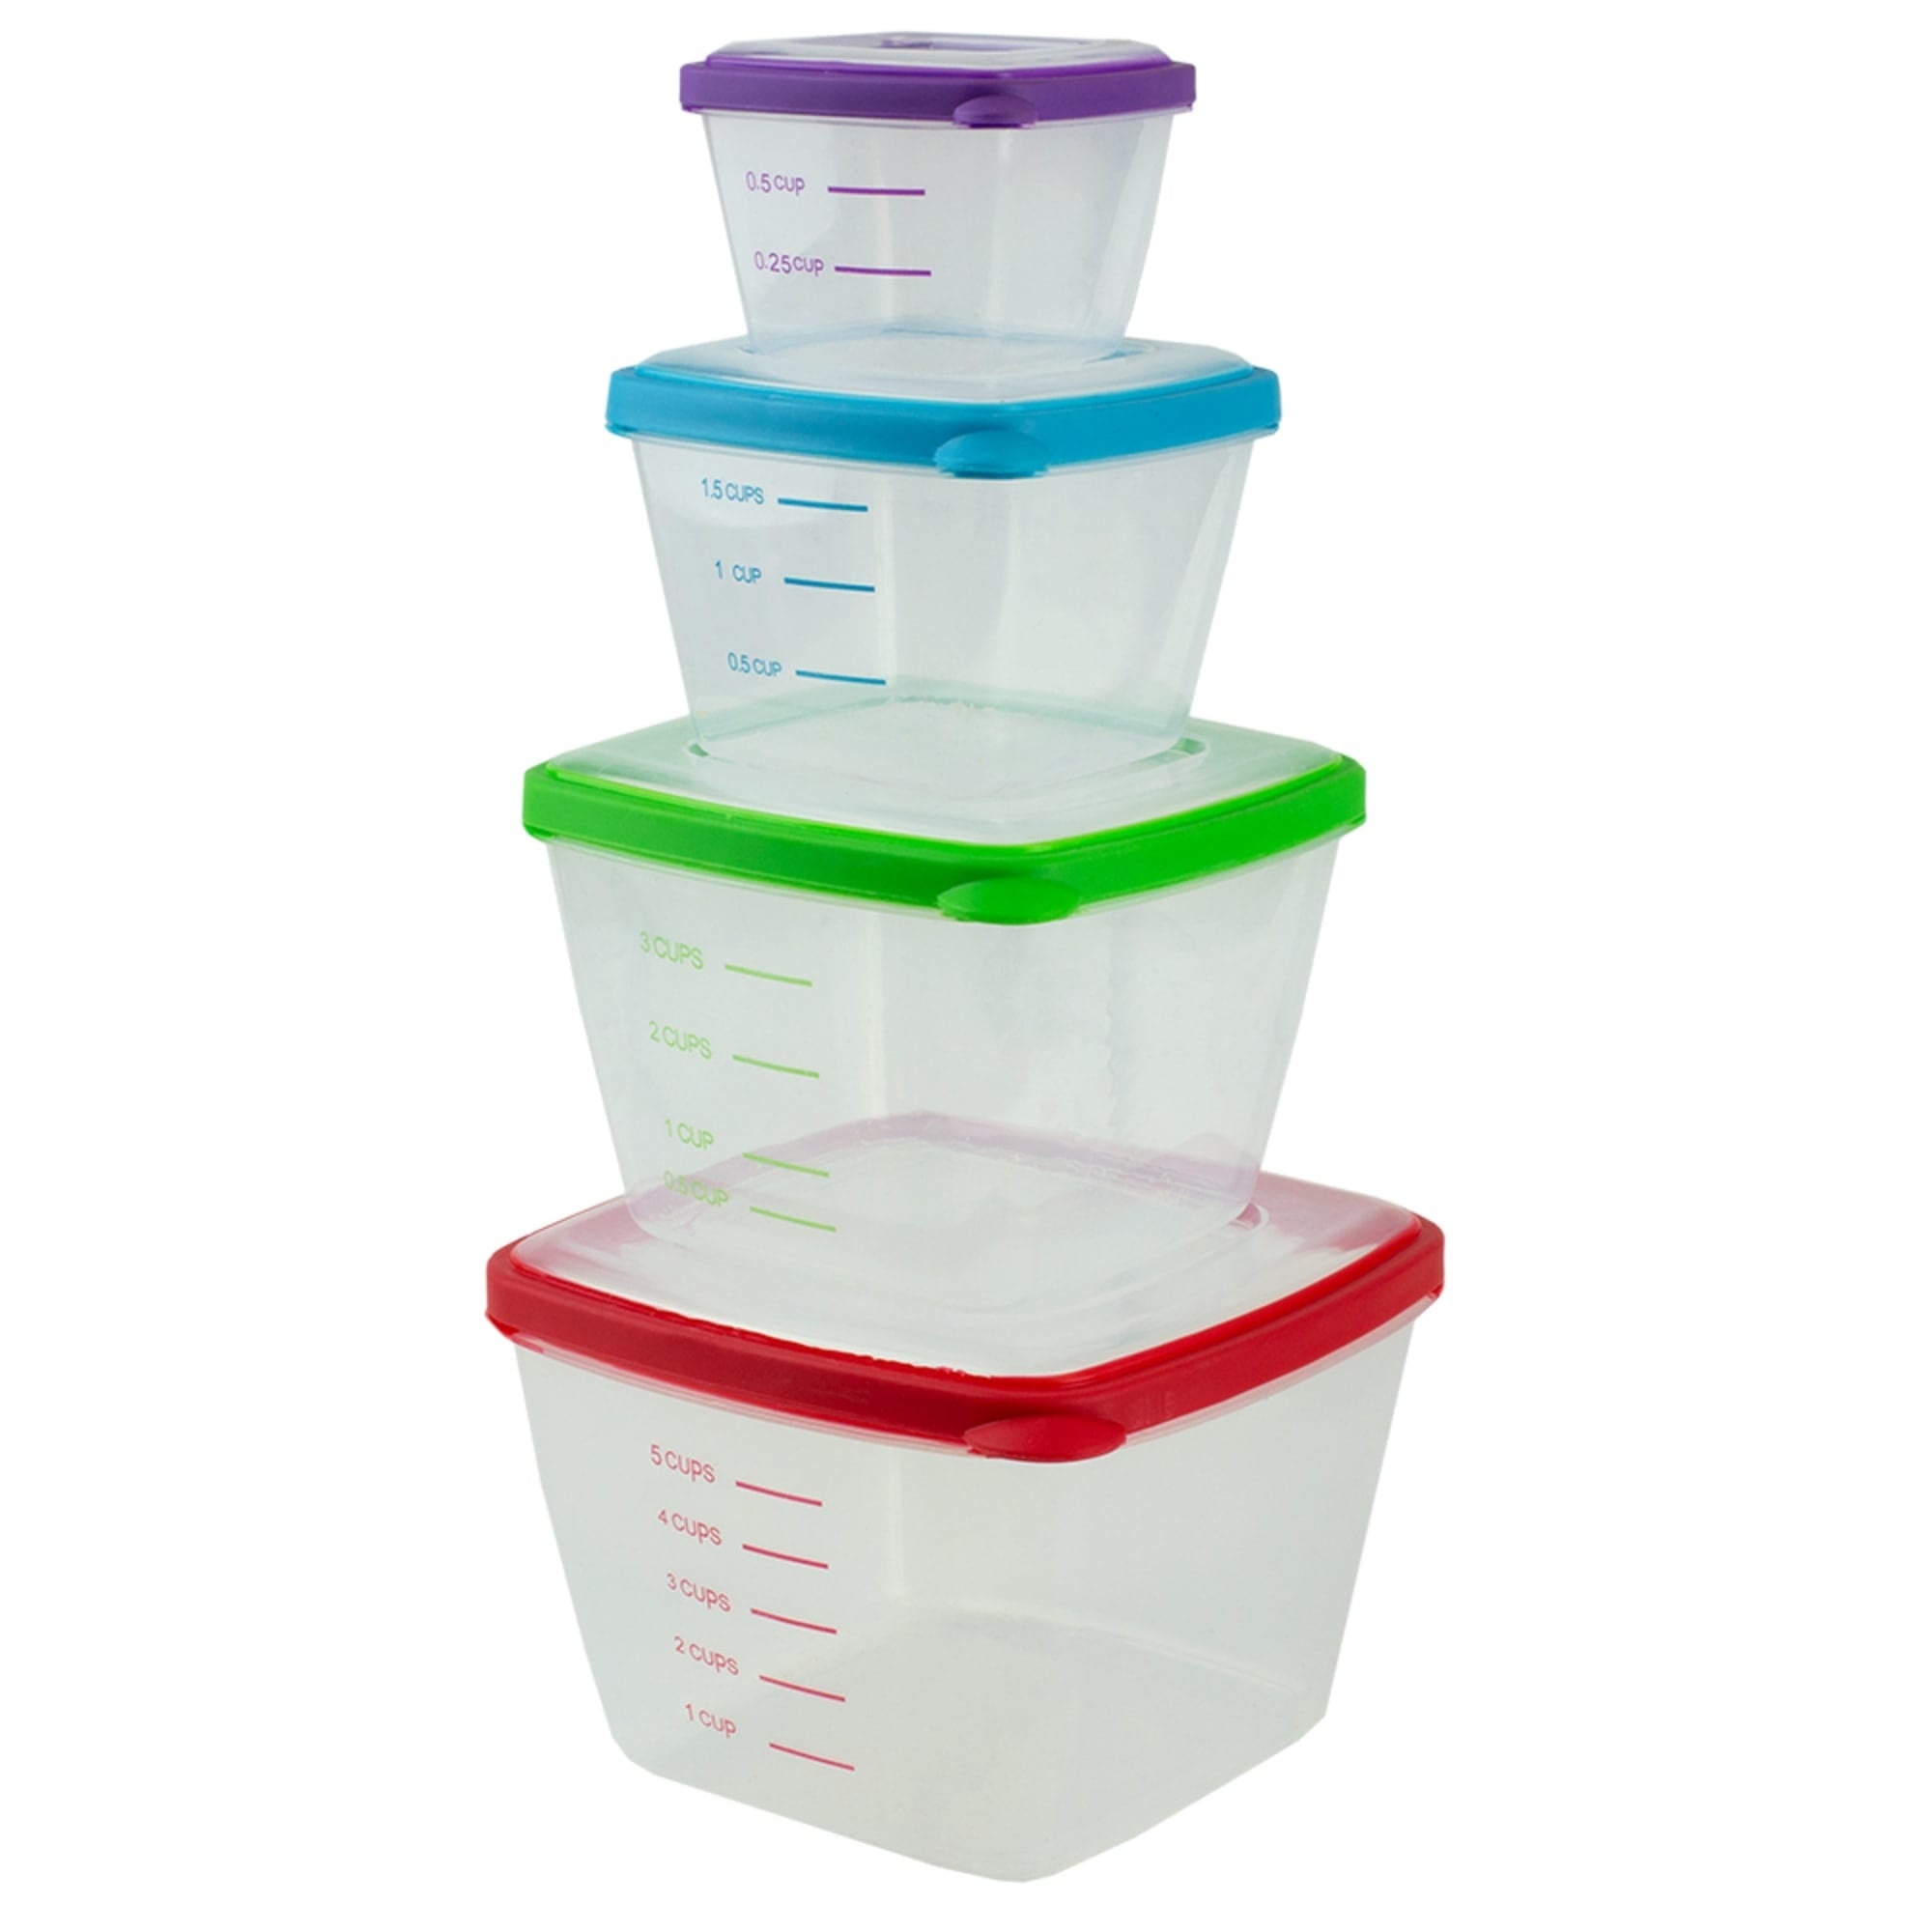 Home Basics 8 Piece Nesting Plastic Food Storage Container Set with Multi-Color Snap-On Lids $5 EACH, CASE PACK OF 12